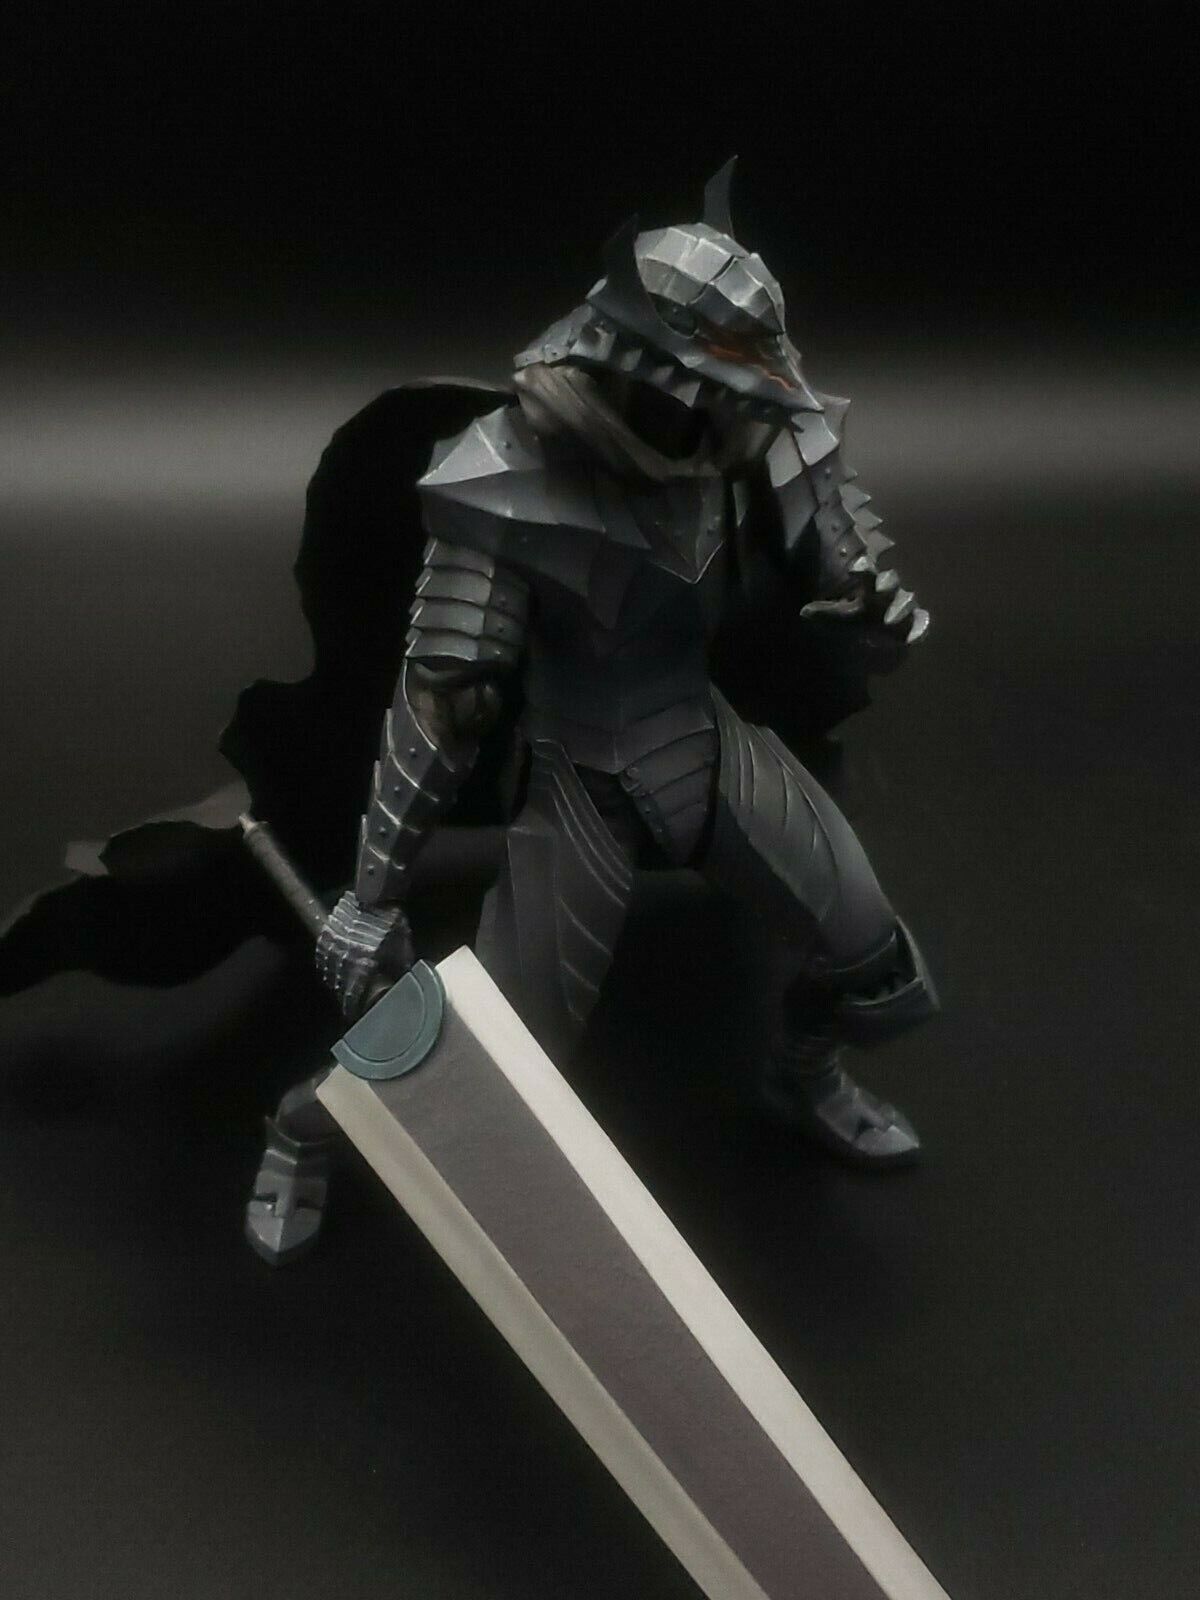 Figma SP-046 Guts Berserker armor Ver. (No box, otherwise complete)